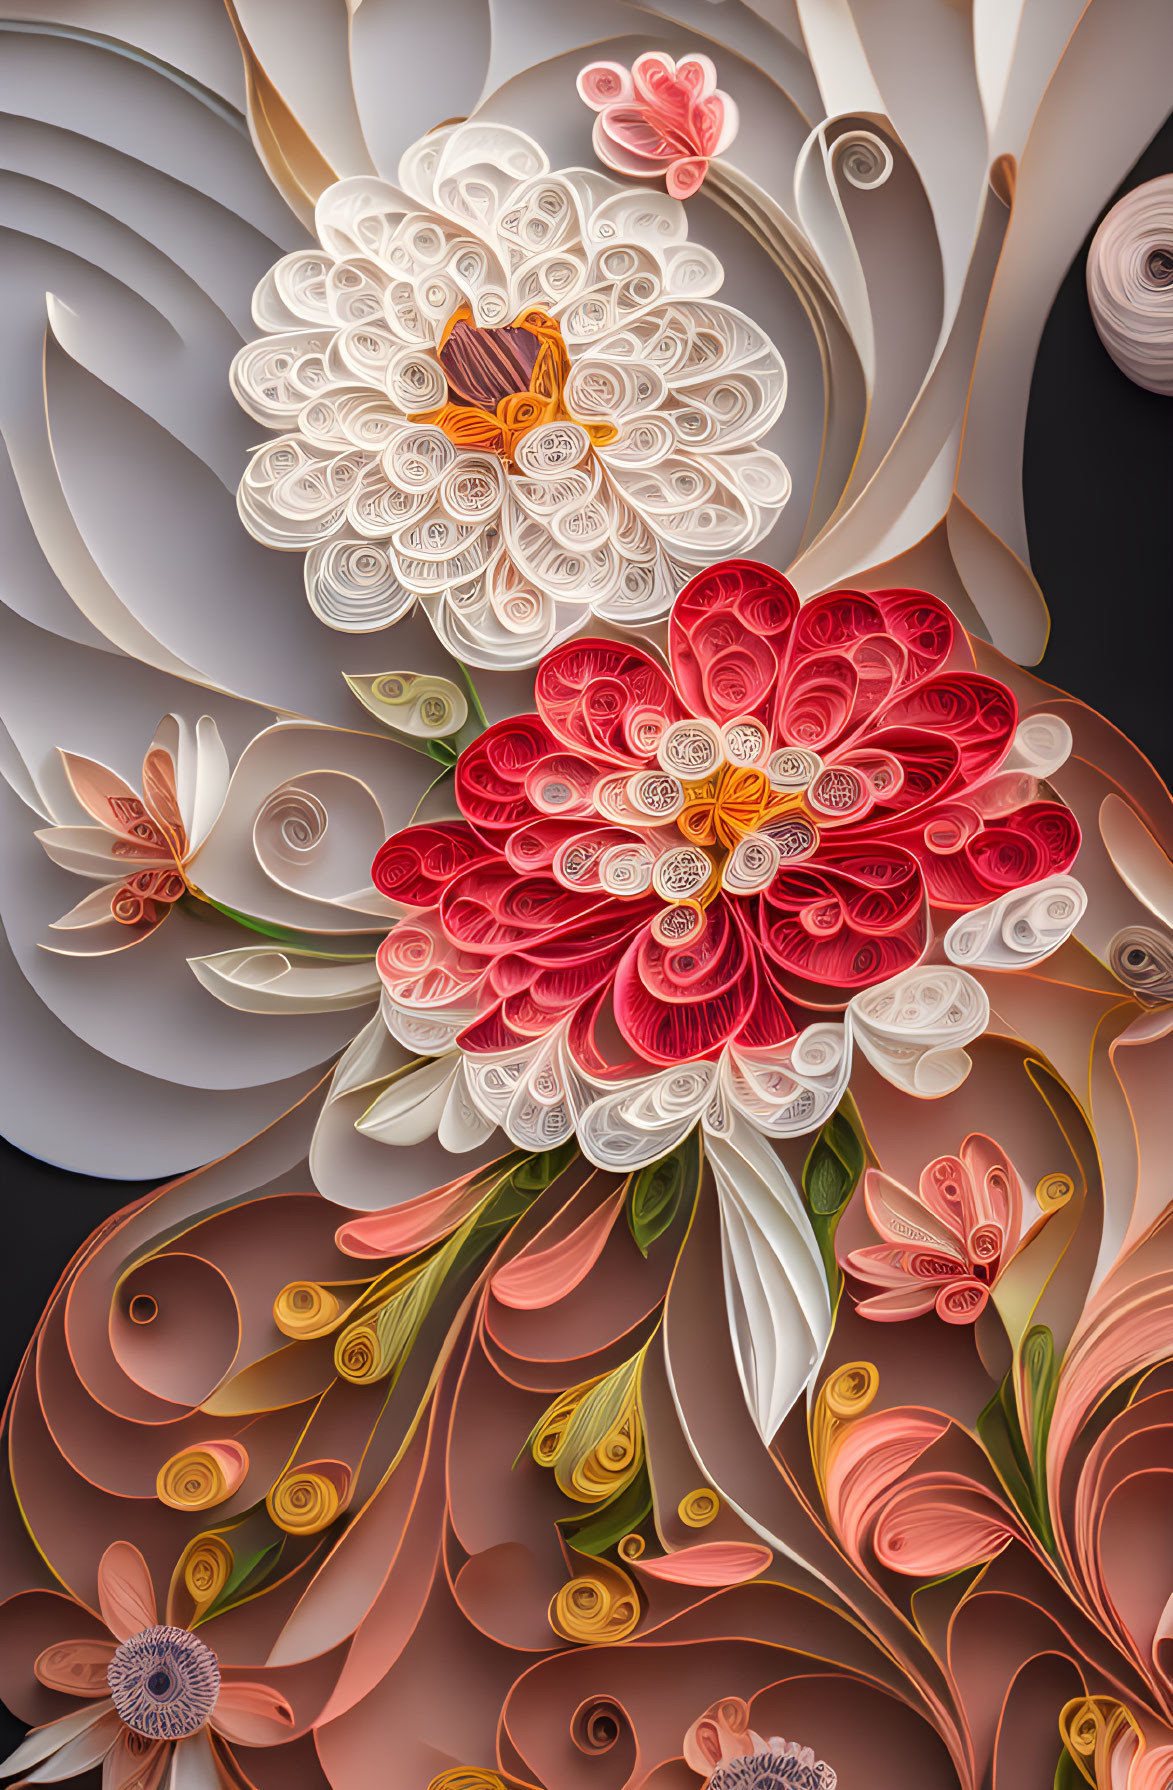 Colorful Paper Quilling Art of Vibrant Flowers and Swirls on Dark Background